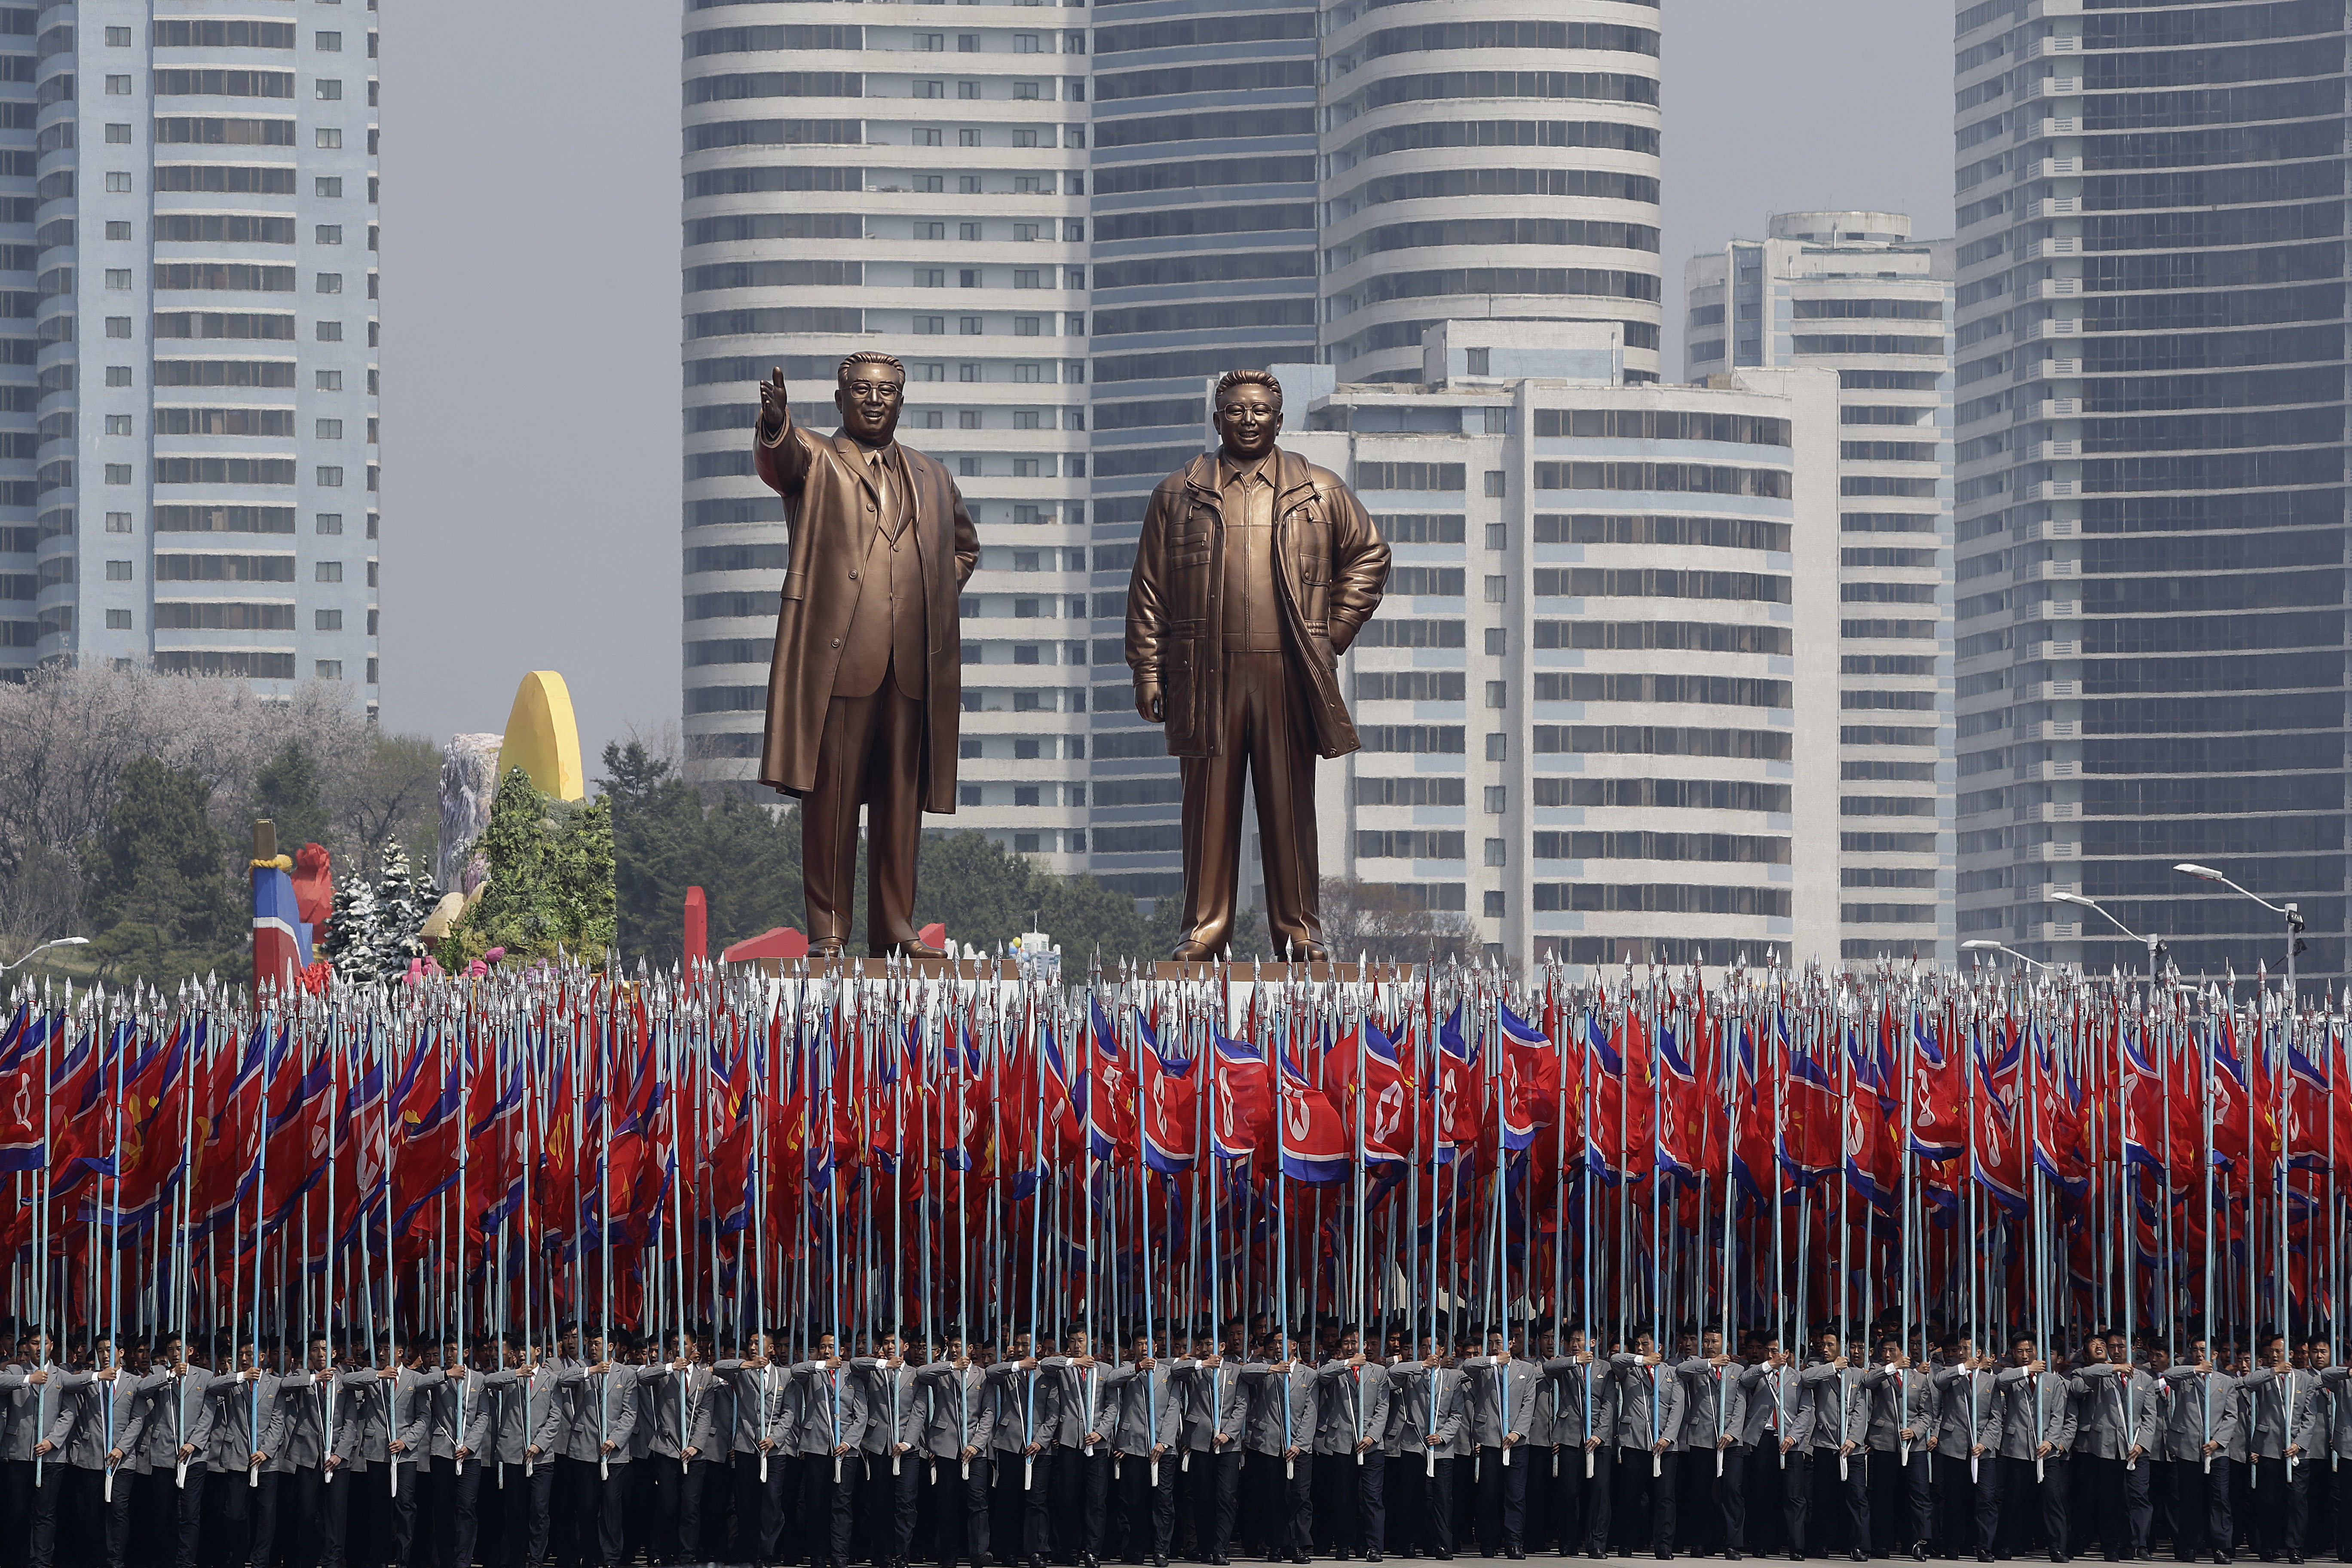 In this Saturday, April 15, 2017 photo, university students carry North Korean national flags and two bronze statues of the late leaders Kim Il Sung and Kim Jong Il during a military parade in Pyongyang, North Korea, to celebrate the 105th birth anniversary of Kim Il Sung, the country's late founder and grandfather of current ruler Kim Jong Un. (AP Photo/Wong Maye-E, File)